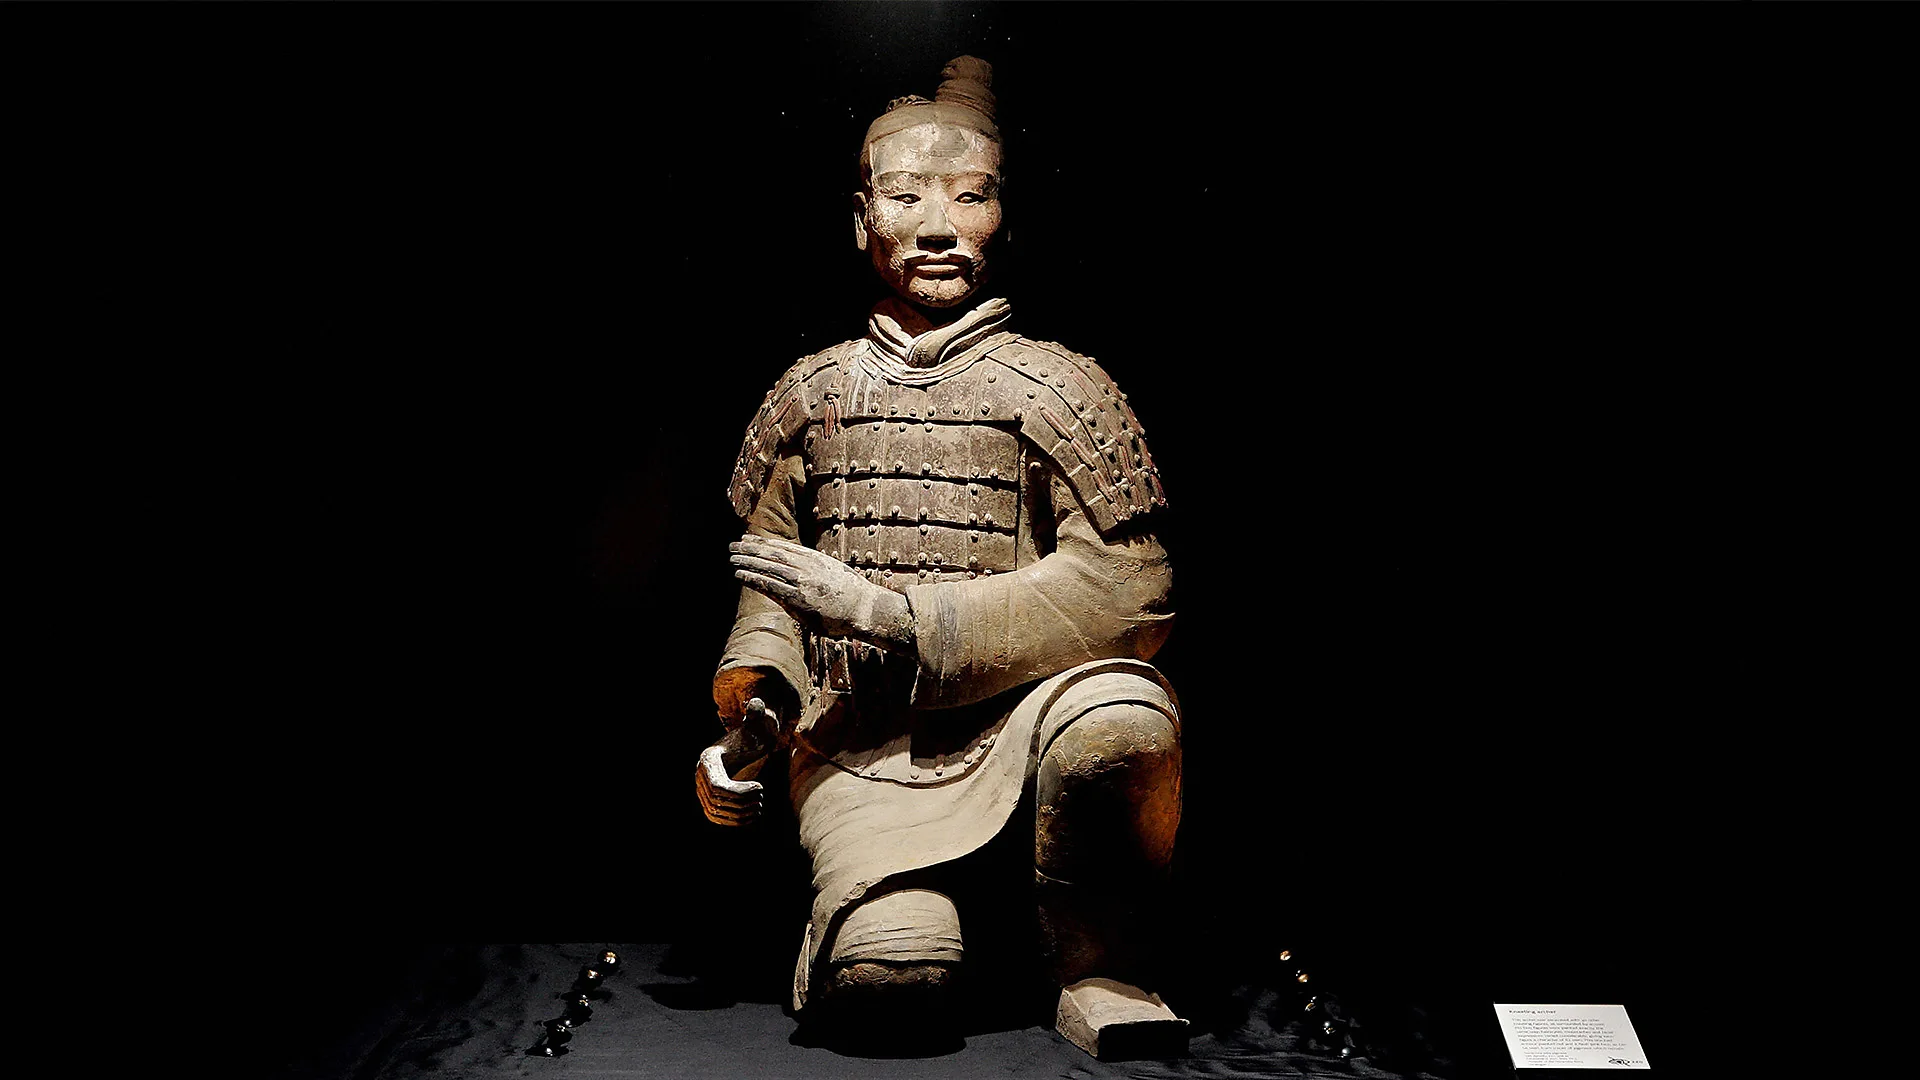 The remarkable shoes of the terracotta warriors